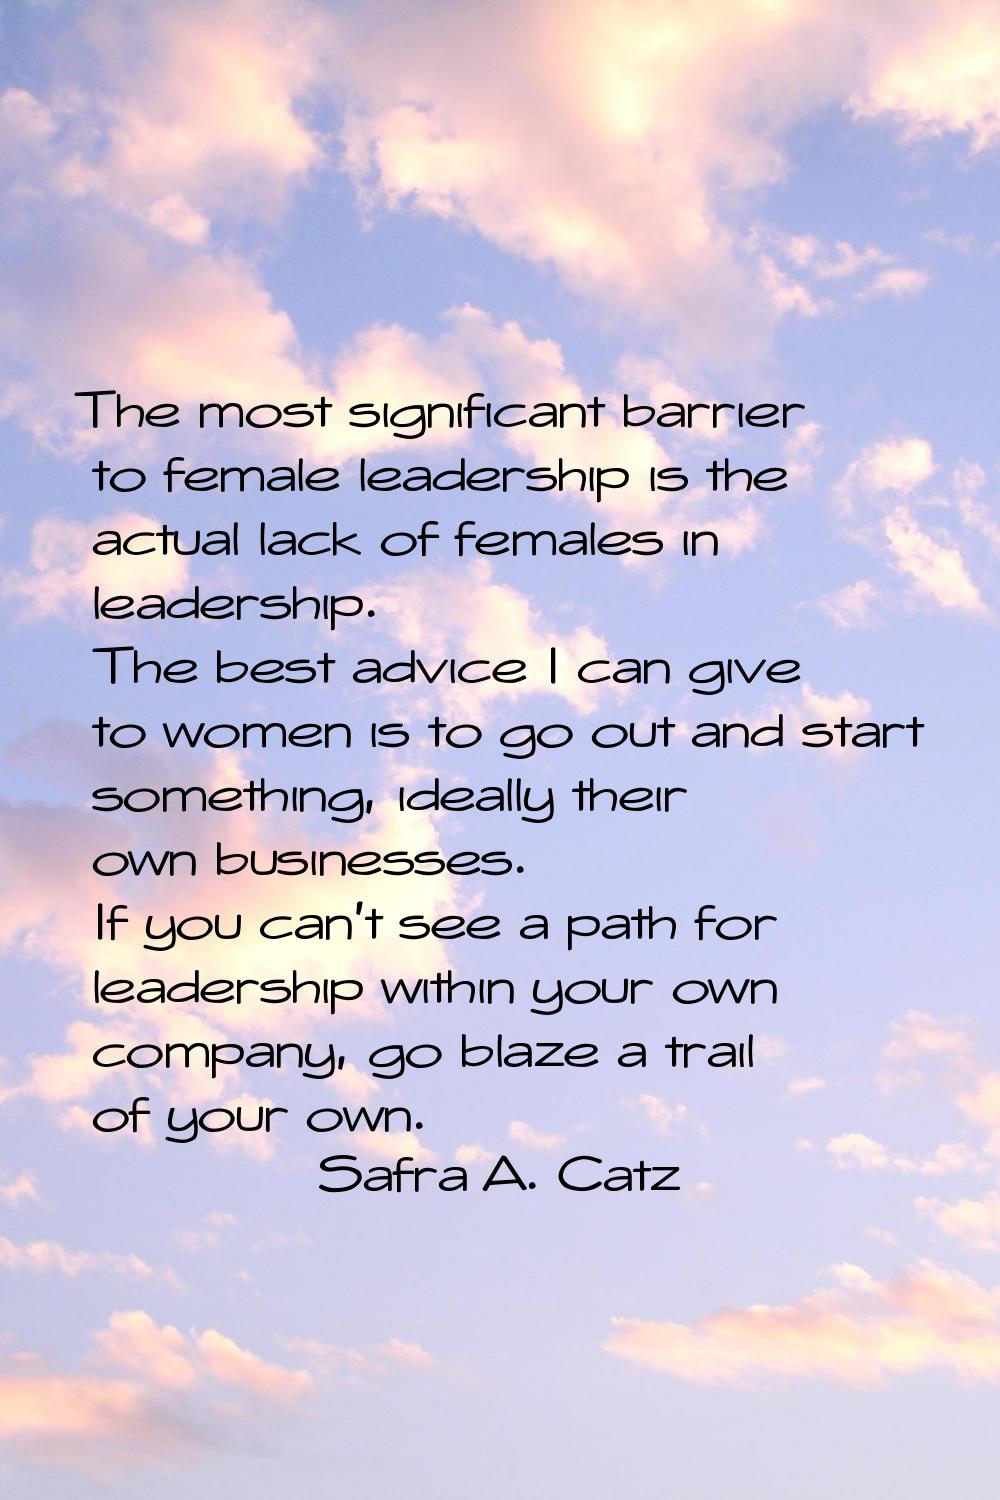 The most significant barrier to female leadership is the actual lack of females in leadership. The 